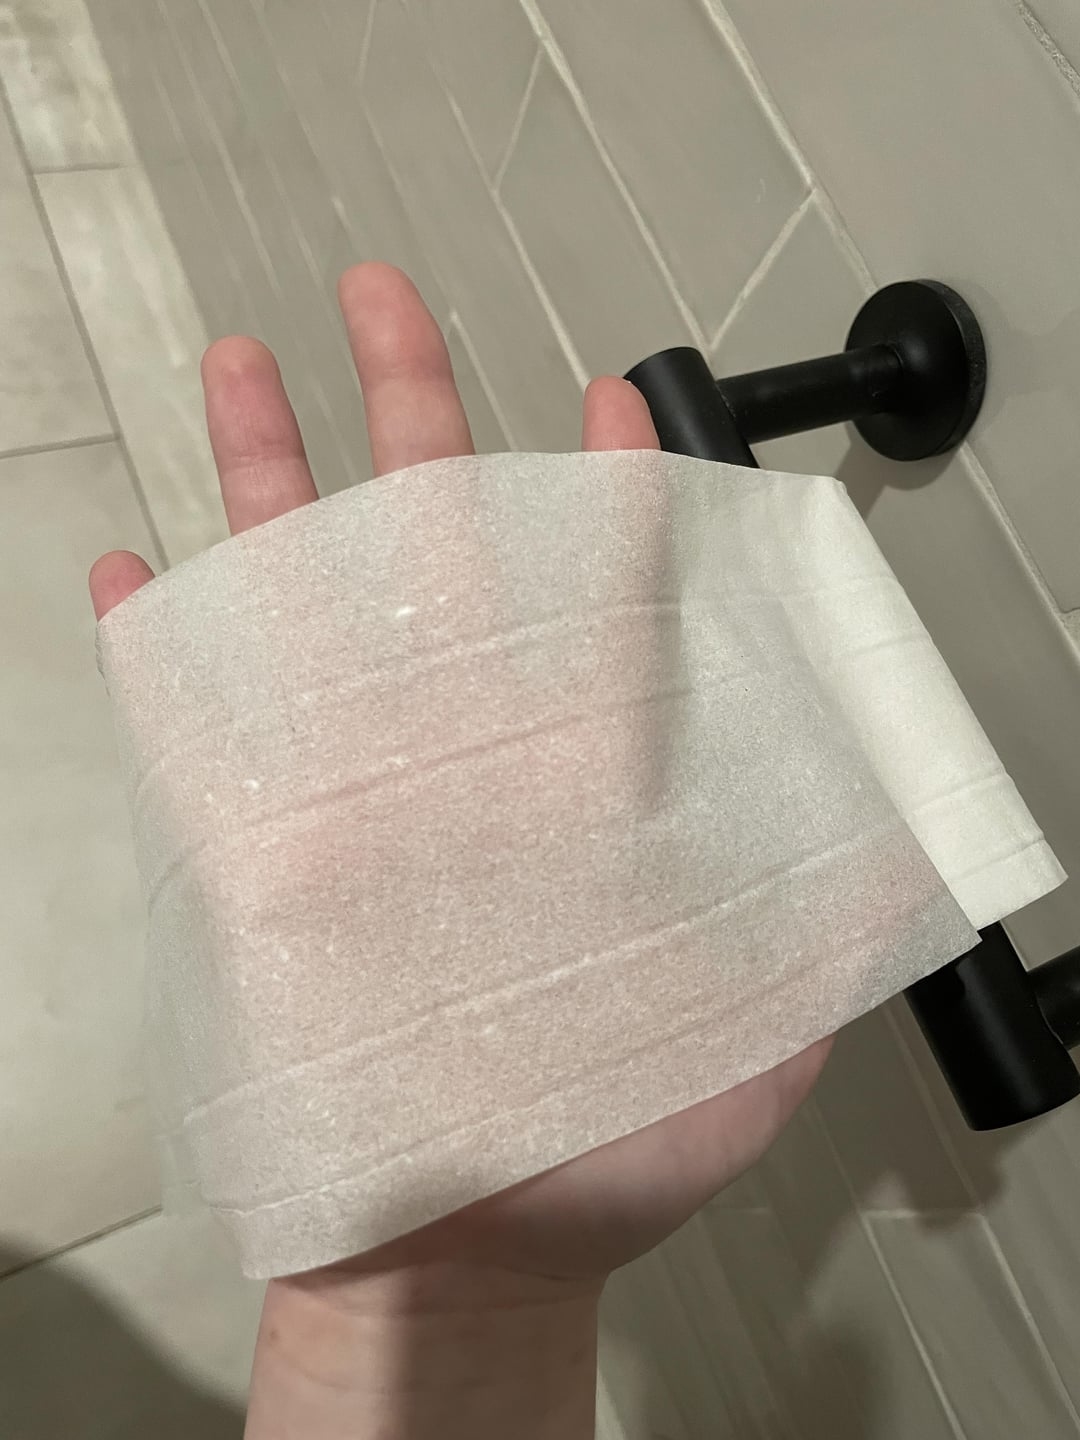 Hand holding a roll of translucent toilet paper